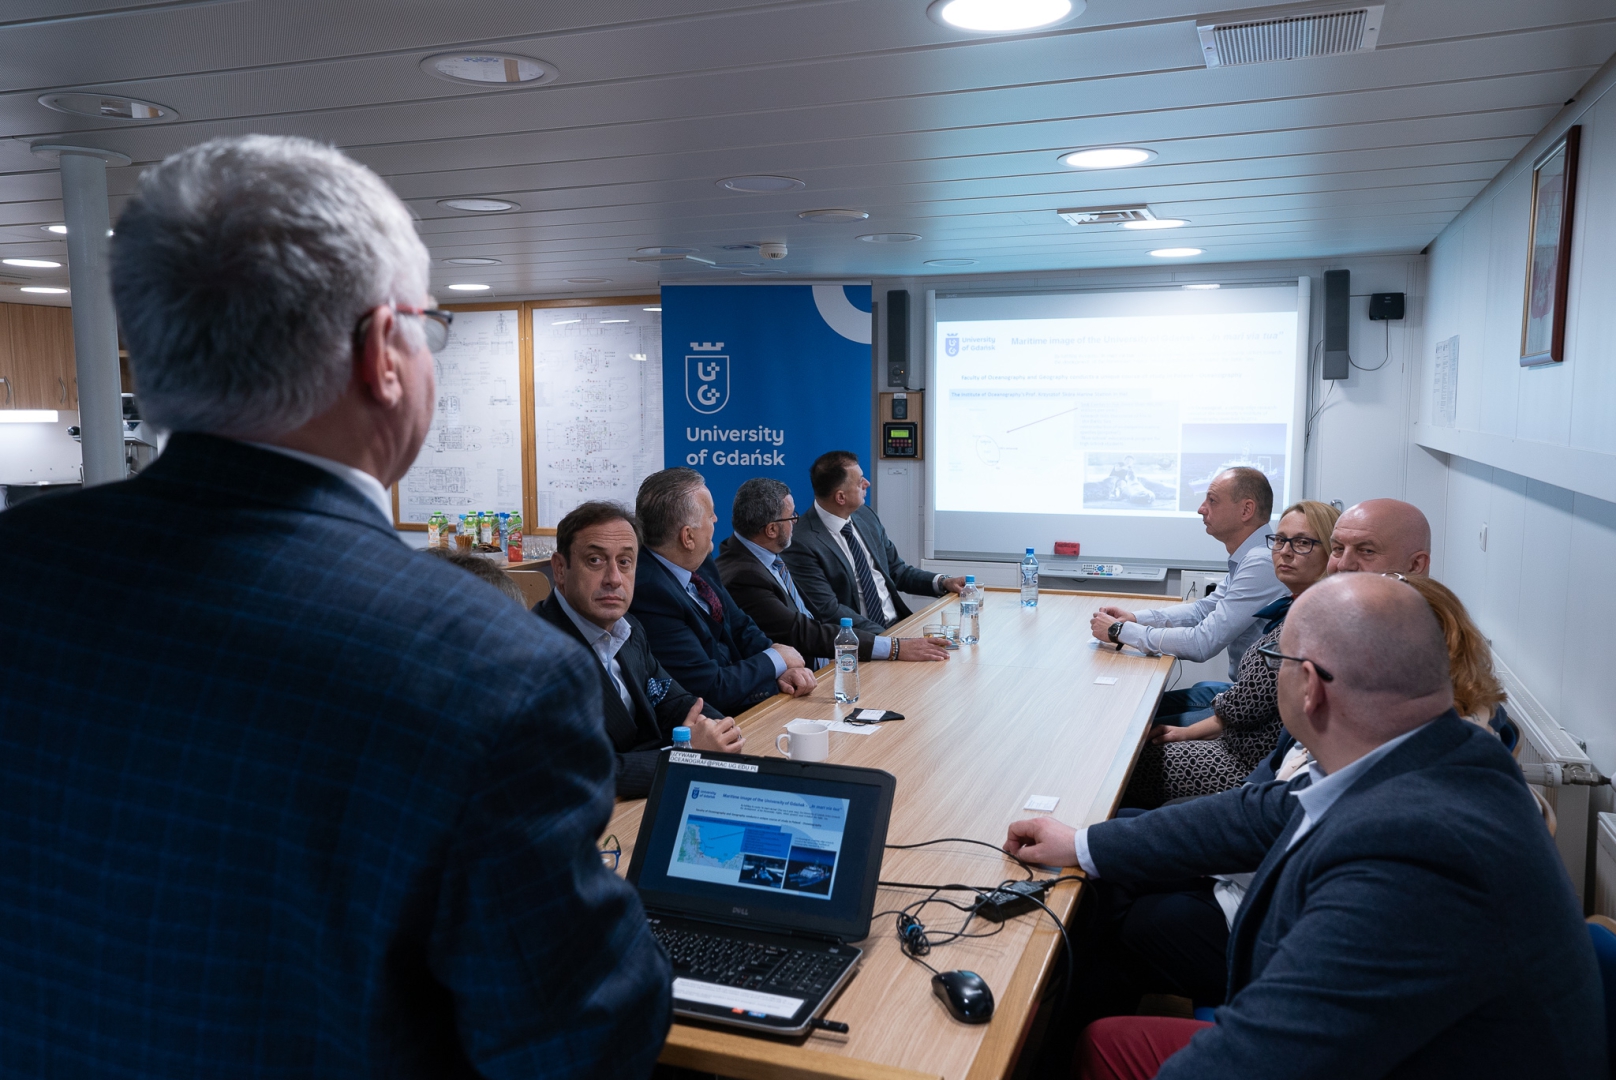 Next Geosolutions strengthens its position in Poland through cooperation with the University of Gdańsk [VIDEO, PHOTOS] - MarinePoland.com